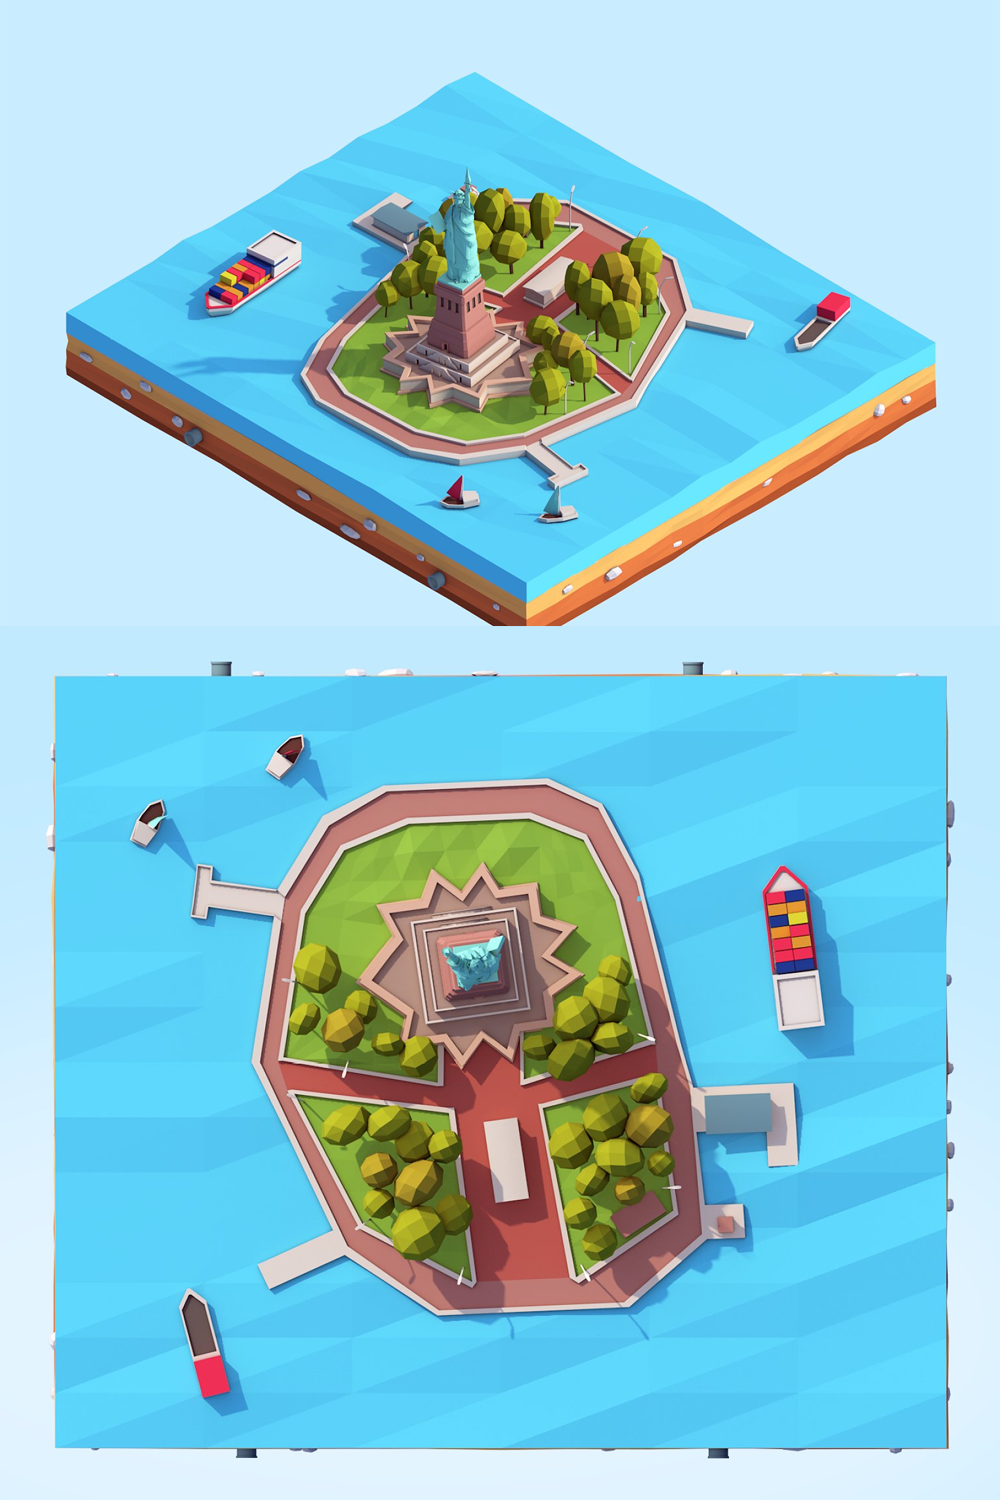 Illustrations low poly statue of liberty scene of pinterest.